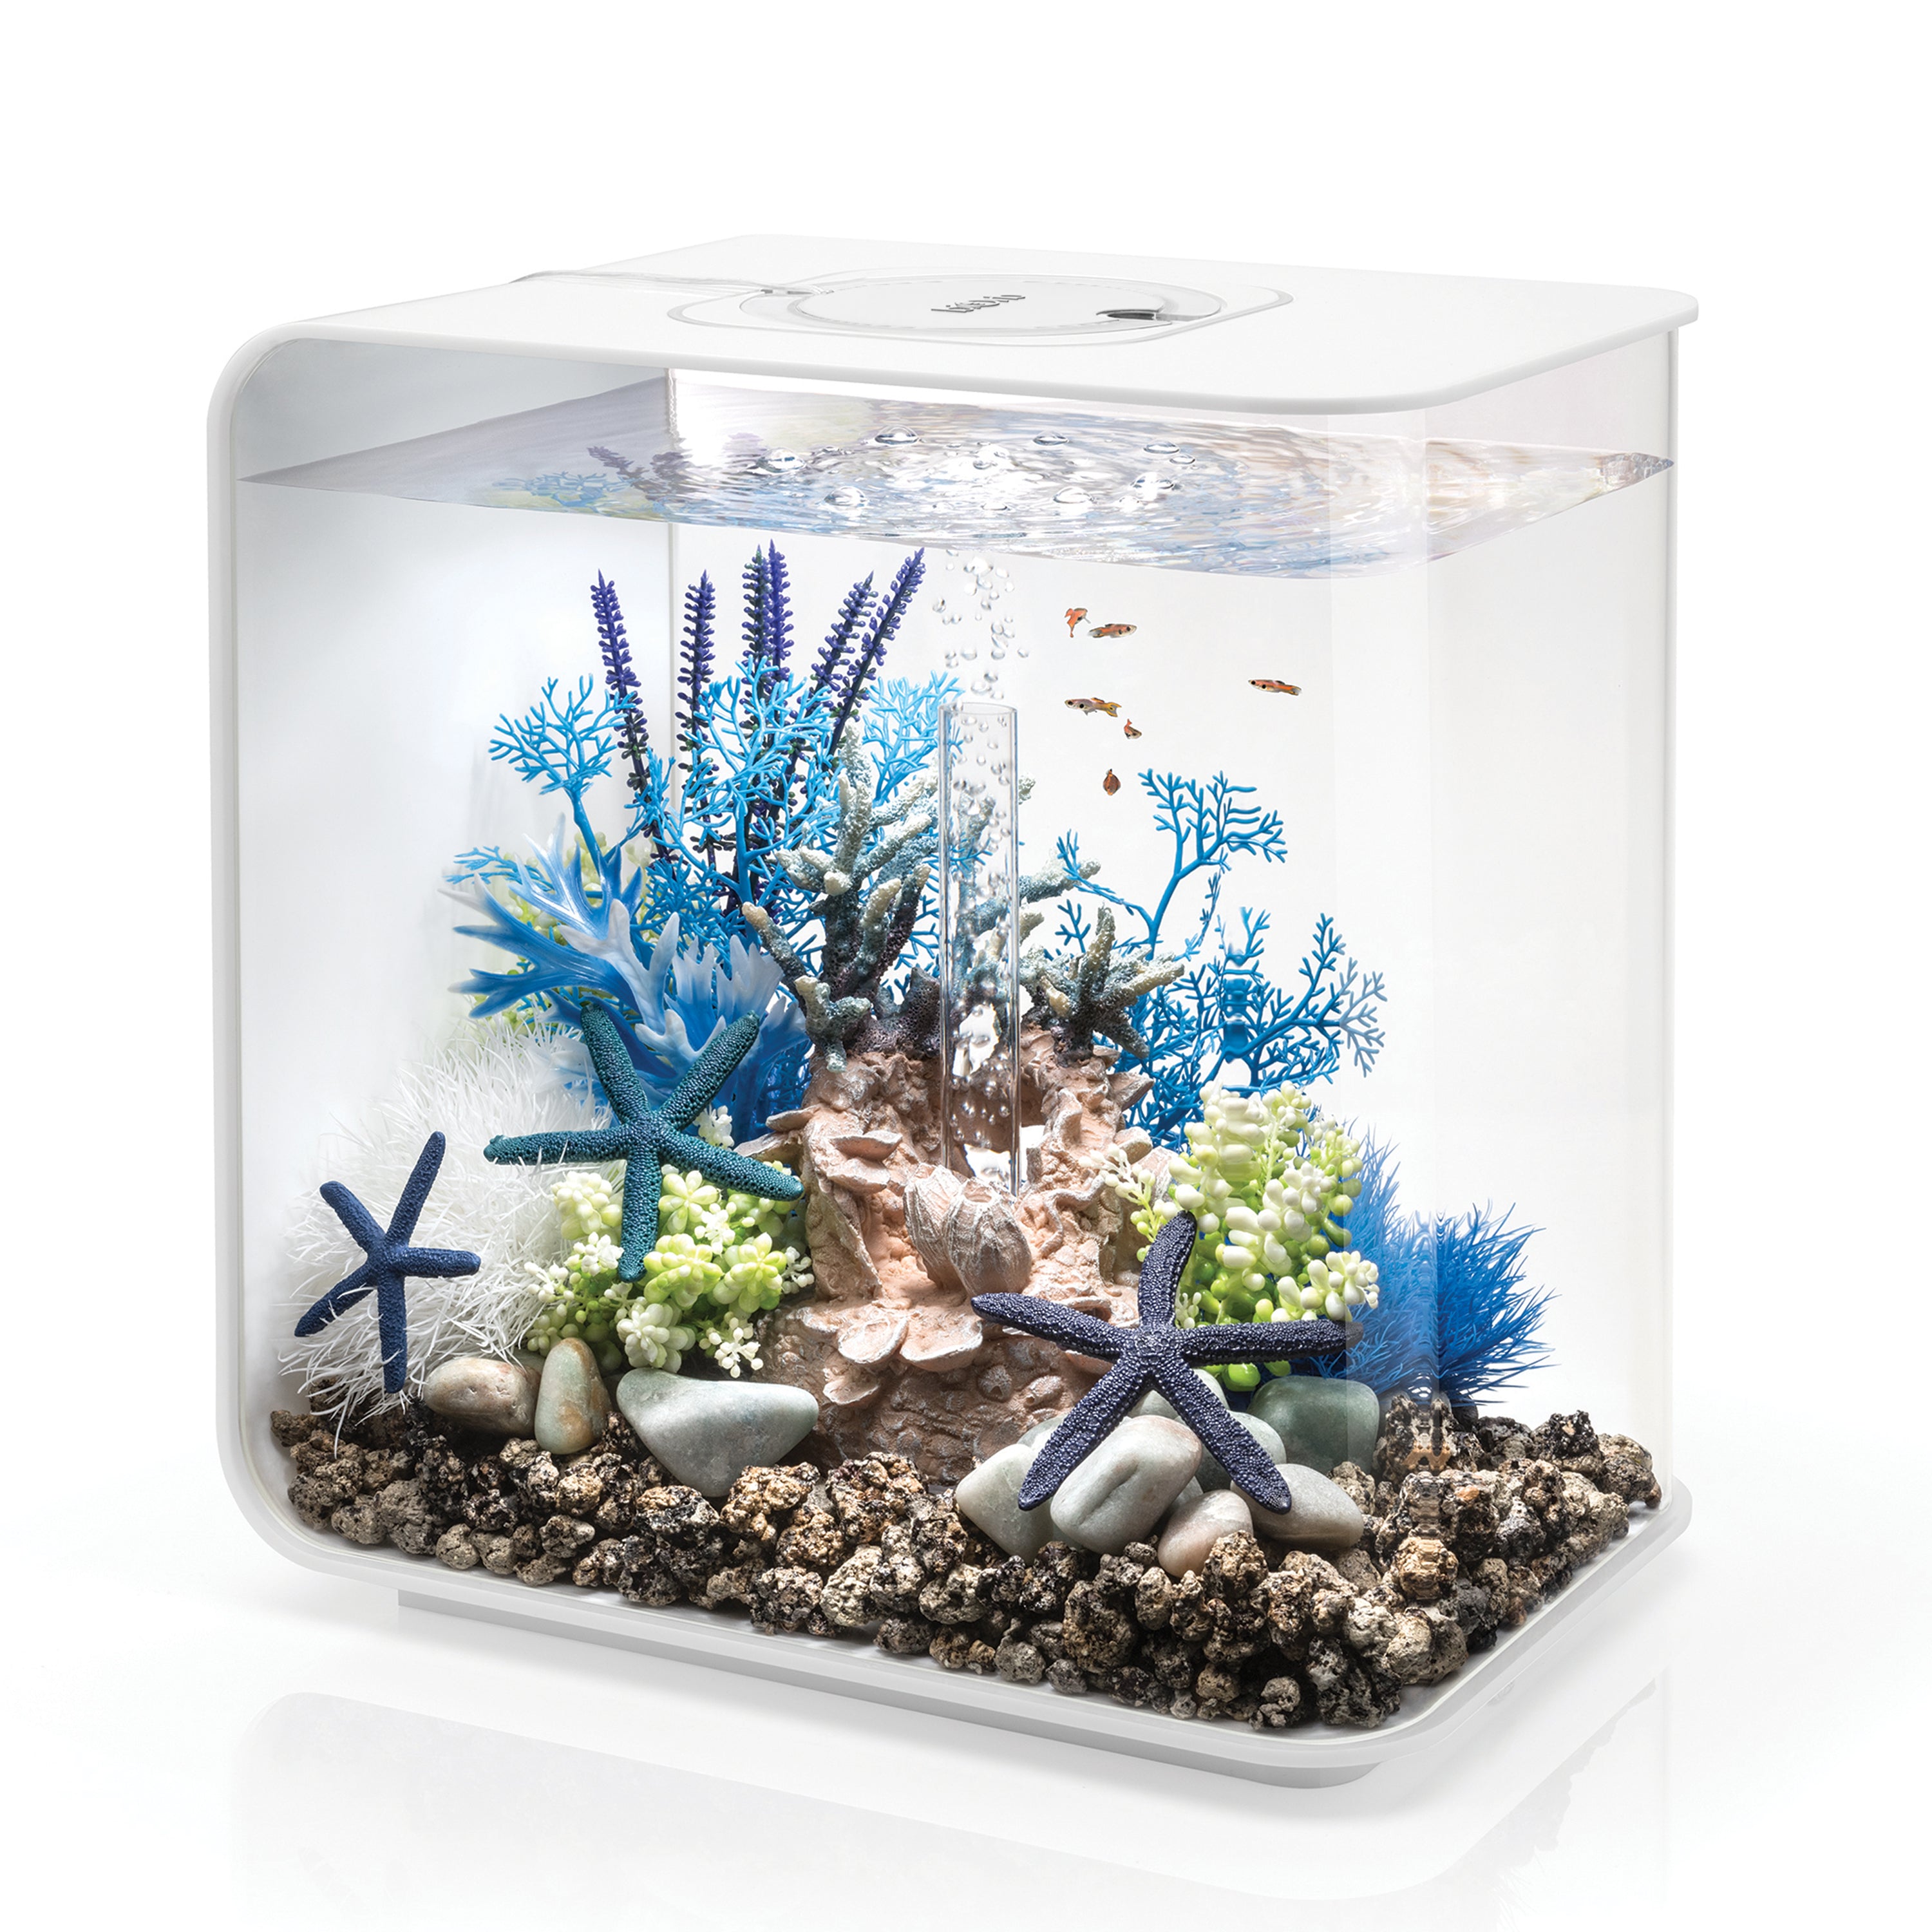 FLOW 30 Aquarium with Standard Light - 8 gallon available in white